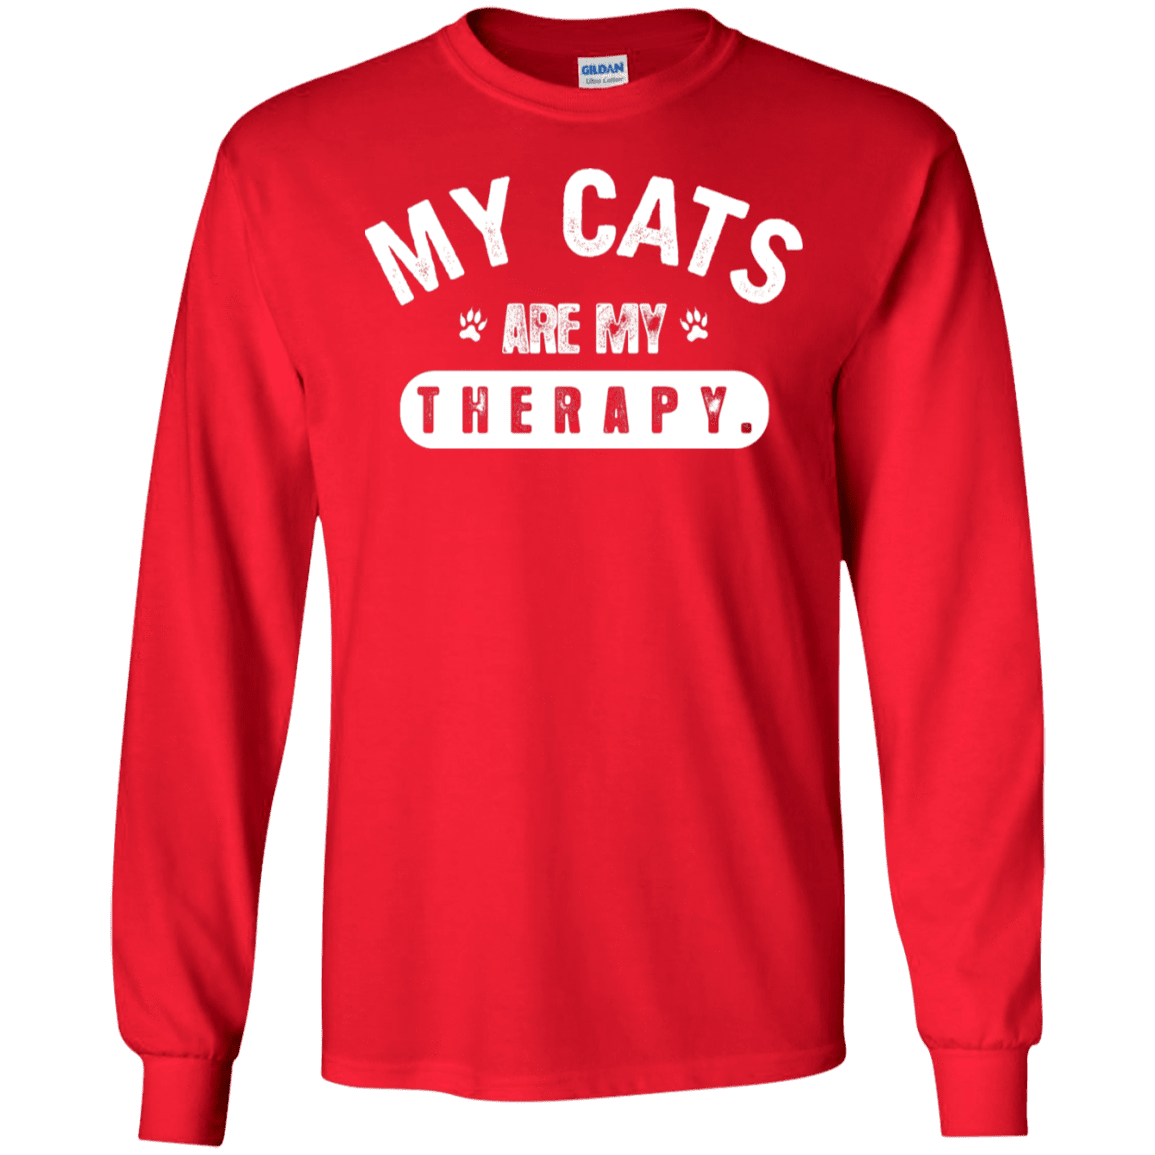 My Cats Are My Therapy - Long Sleeve T Shirt.